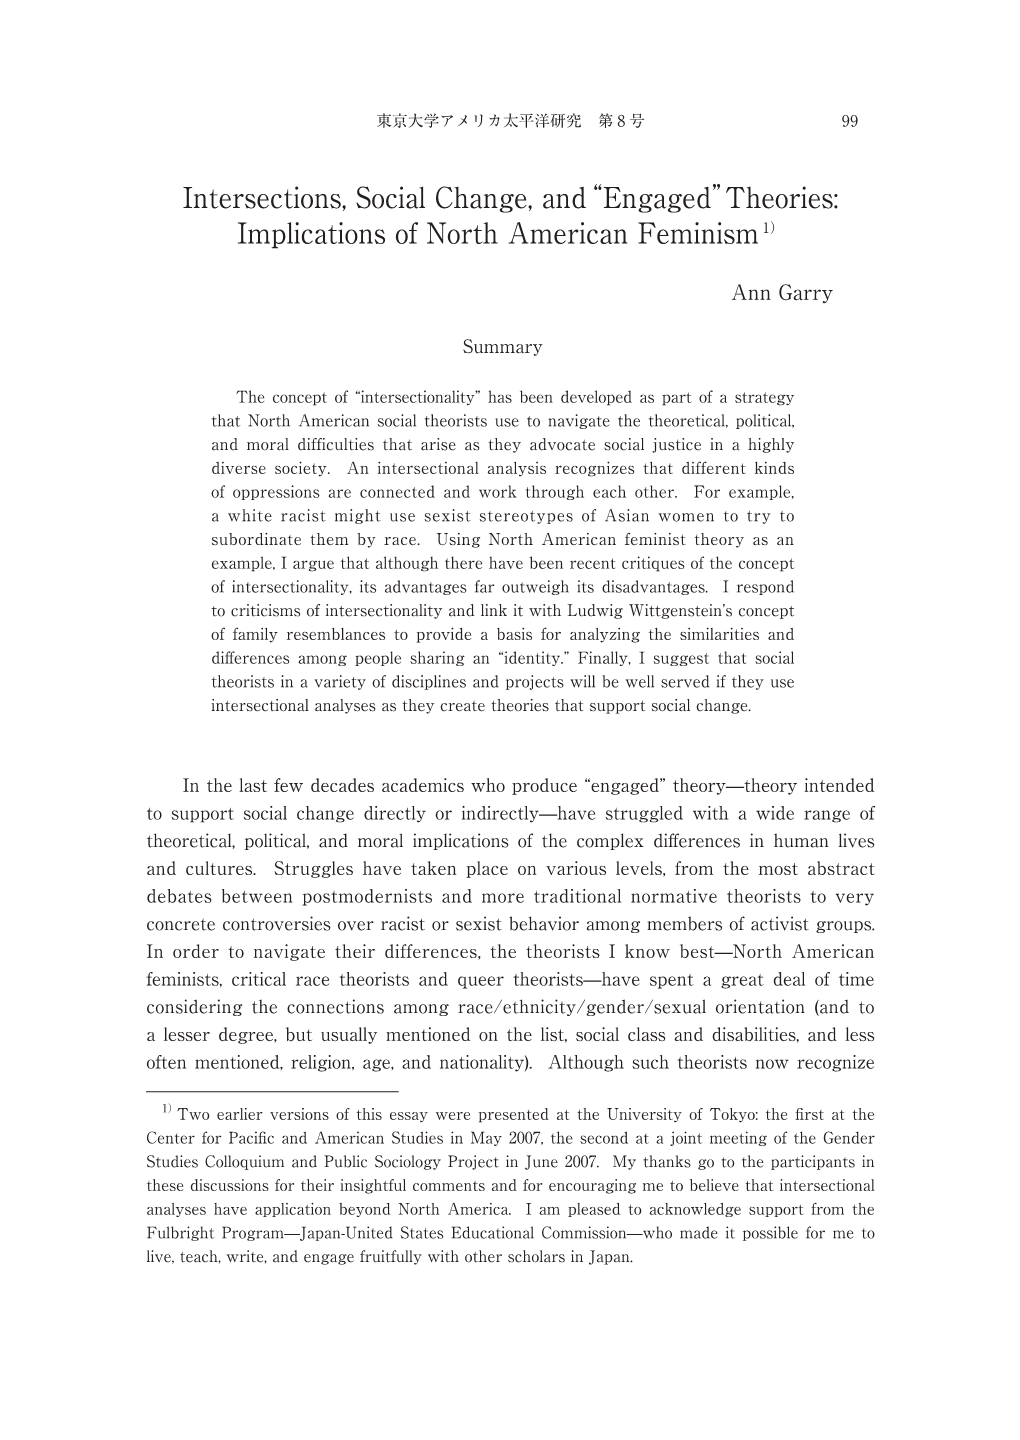 Intersections, Social Change, And“Engaged”Theories: Implications of North American Feminism 1）